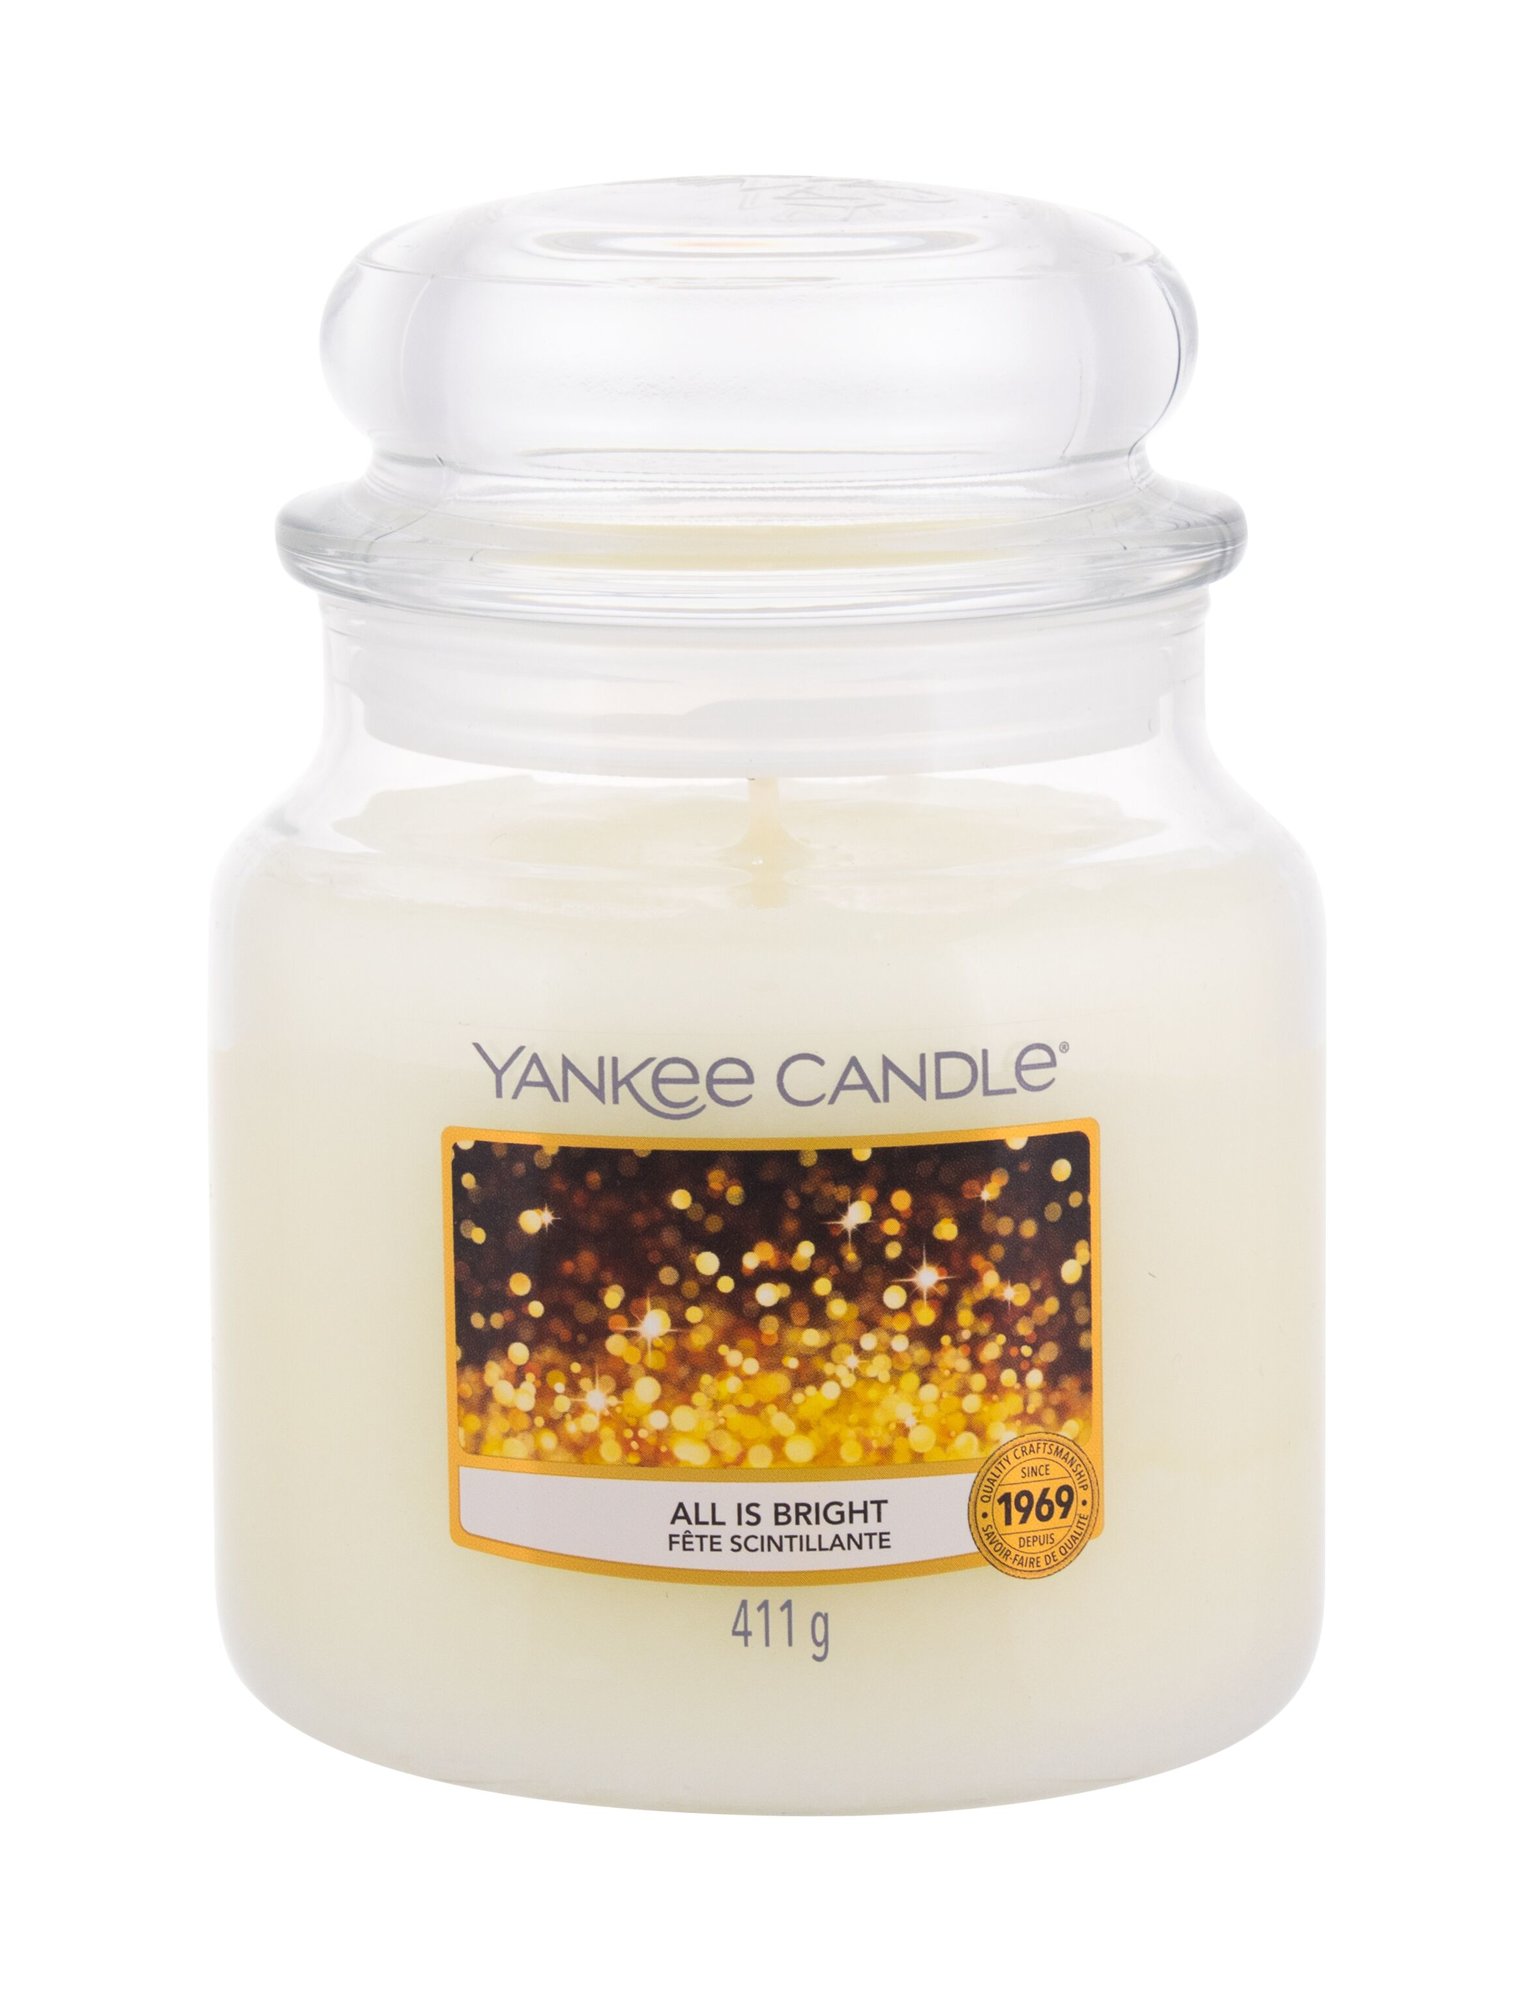 Yankee Candle All Is Bright 411g Kvepalai Unisex Scented Candle